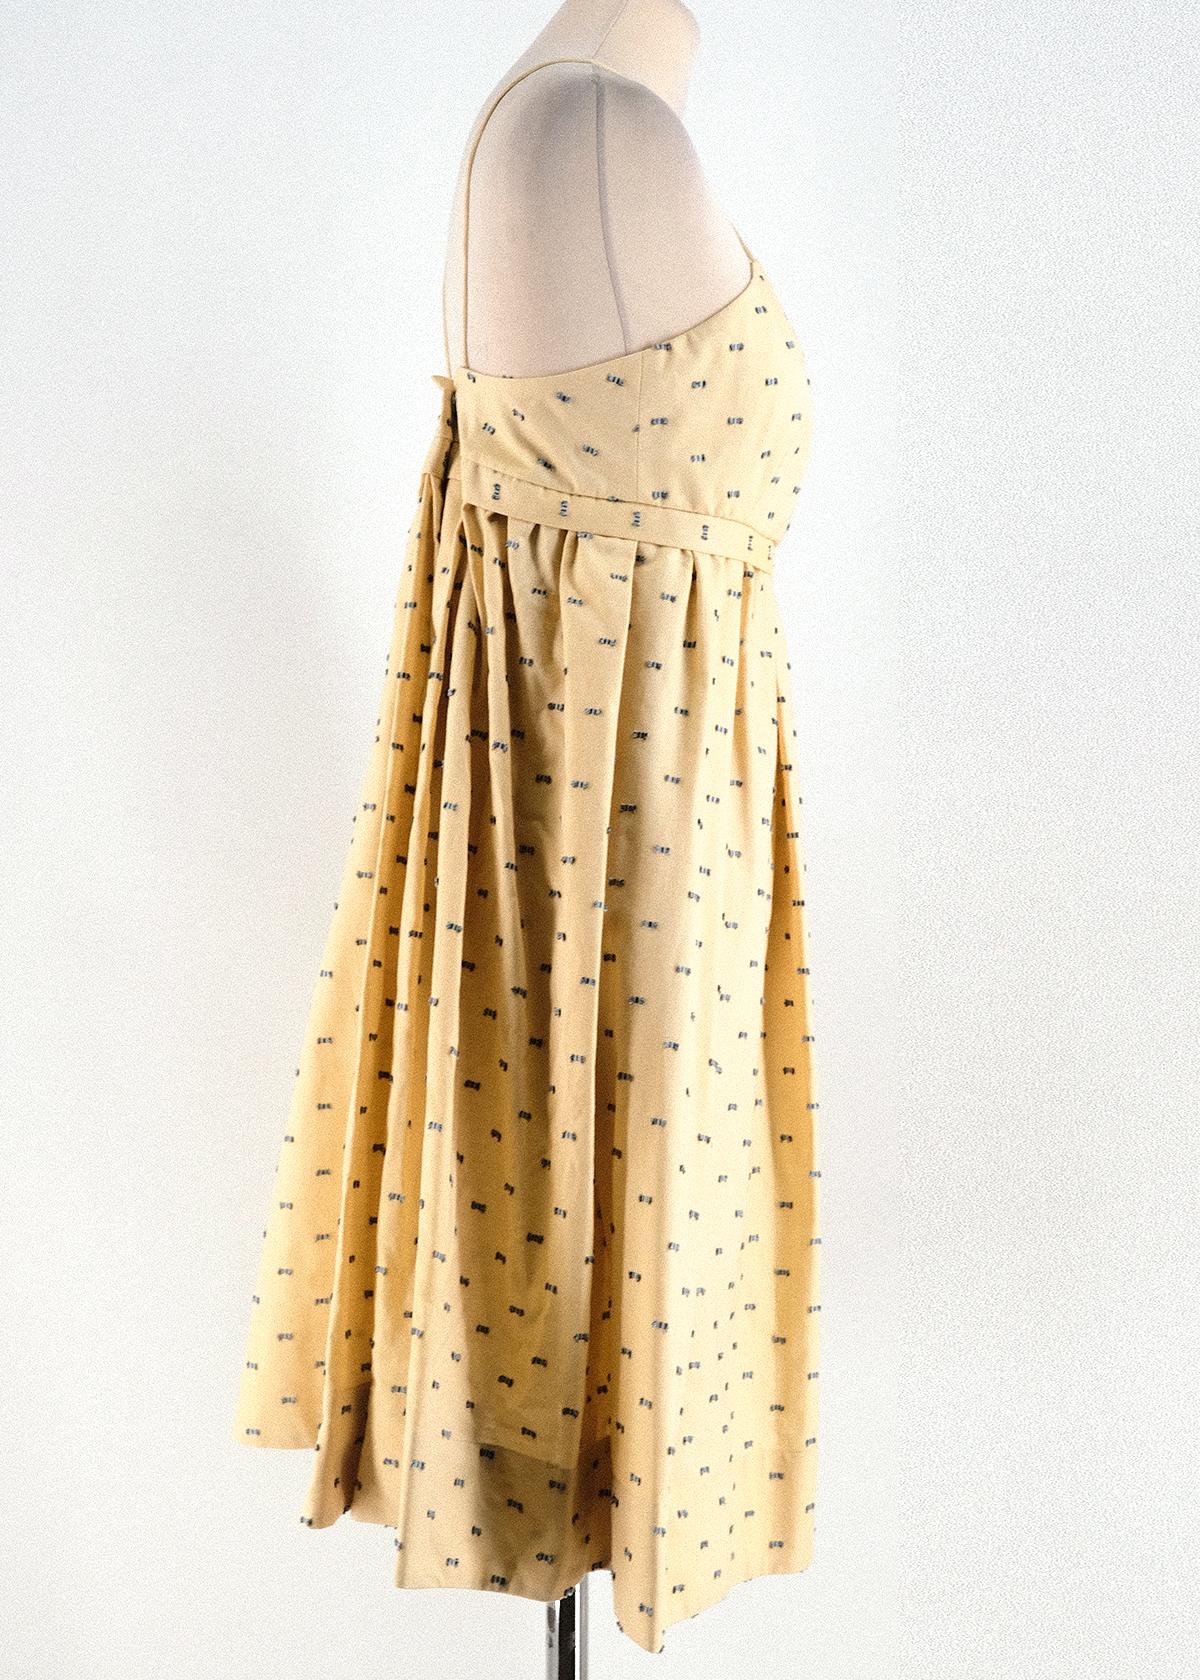 Victoria Victoria Beckham Pale Yellow Fils Coupe Dress

- Pale Yellow Fils Coupe Dress
- 100% Cotton
- Cross Spaghetti Straps 
- Box Pleated Empire Waist 
- Push button fastening at back

Please note, these items are pre-owned and may show some